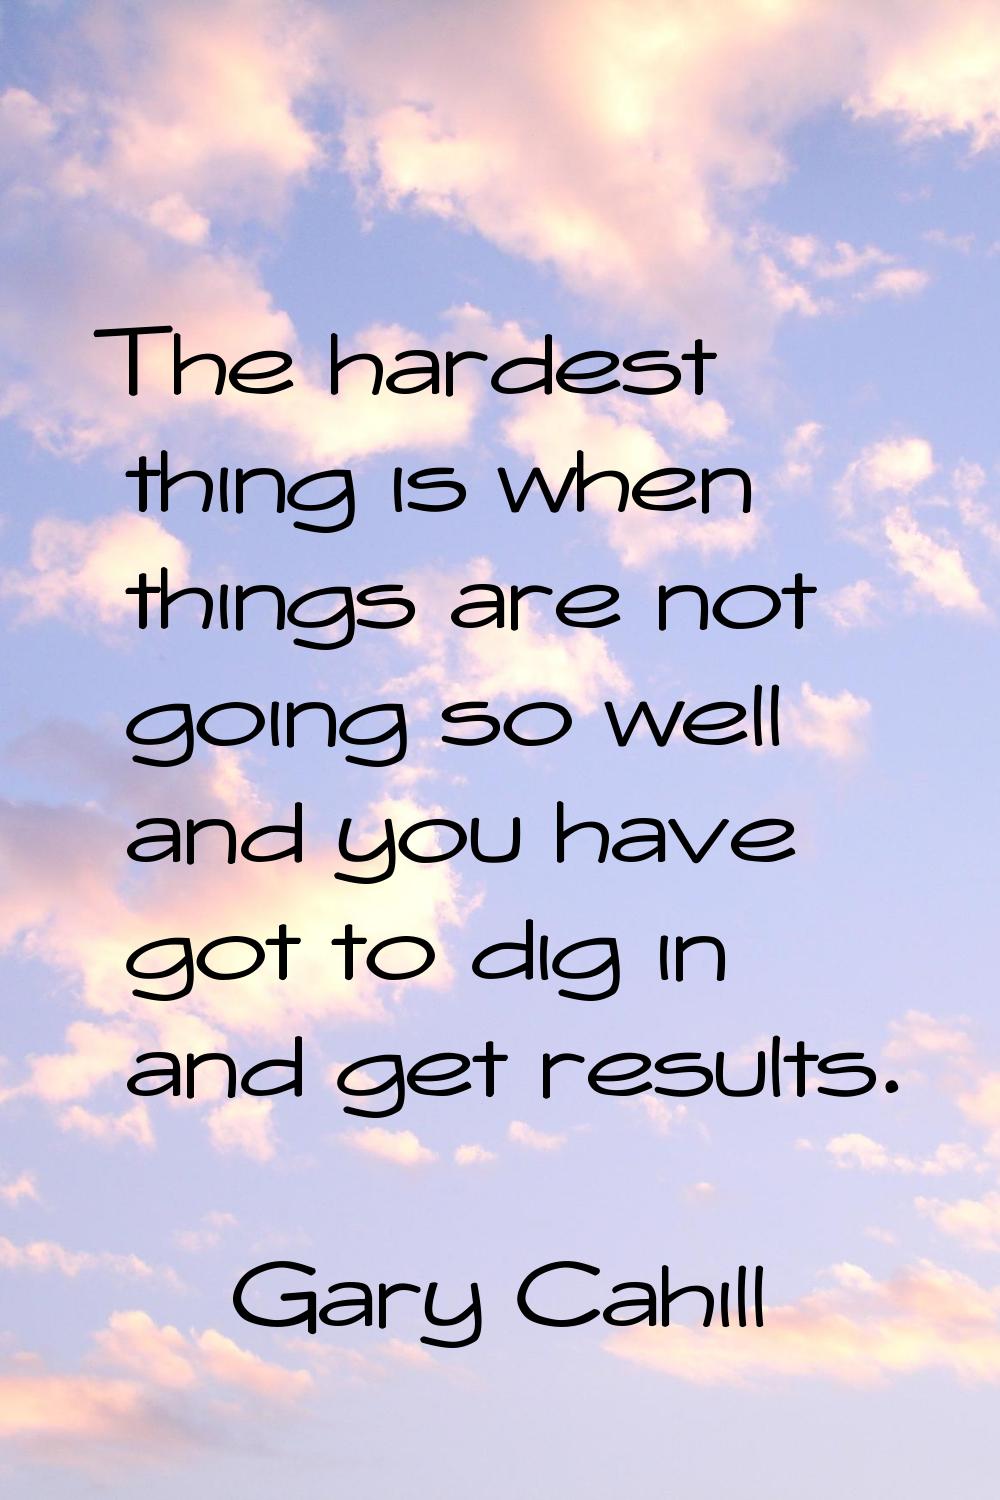 The hardest thing is when things are not going so well and you have got to dig in and get results.